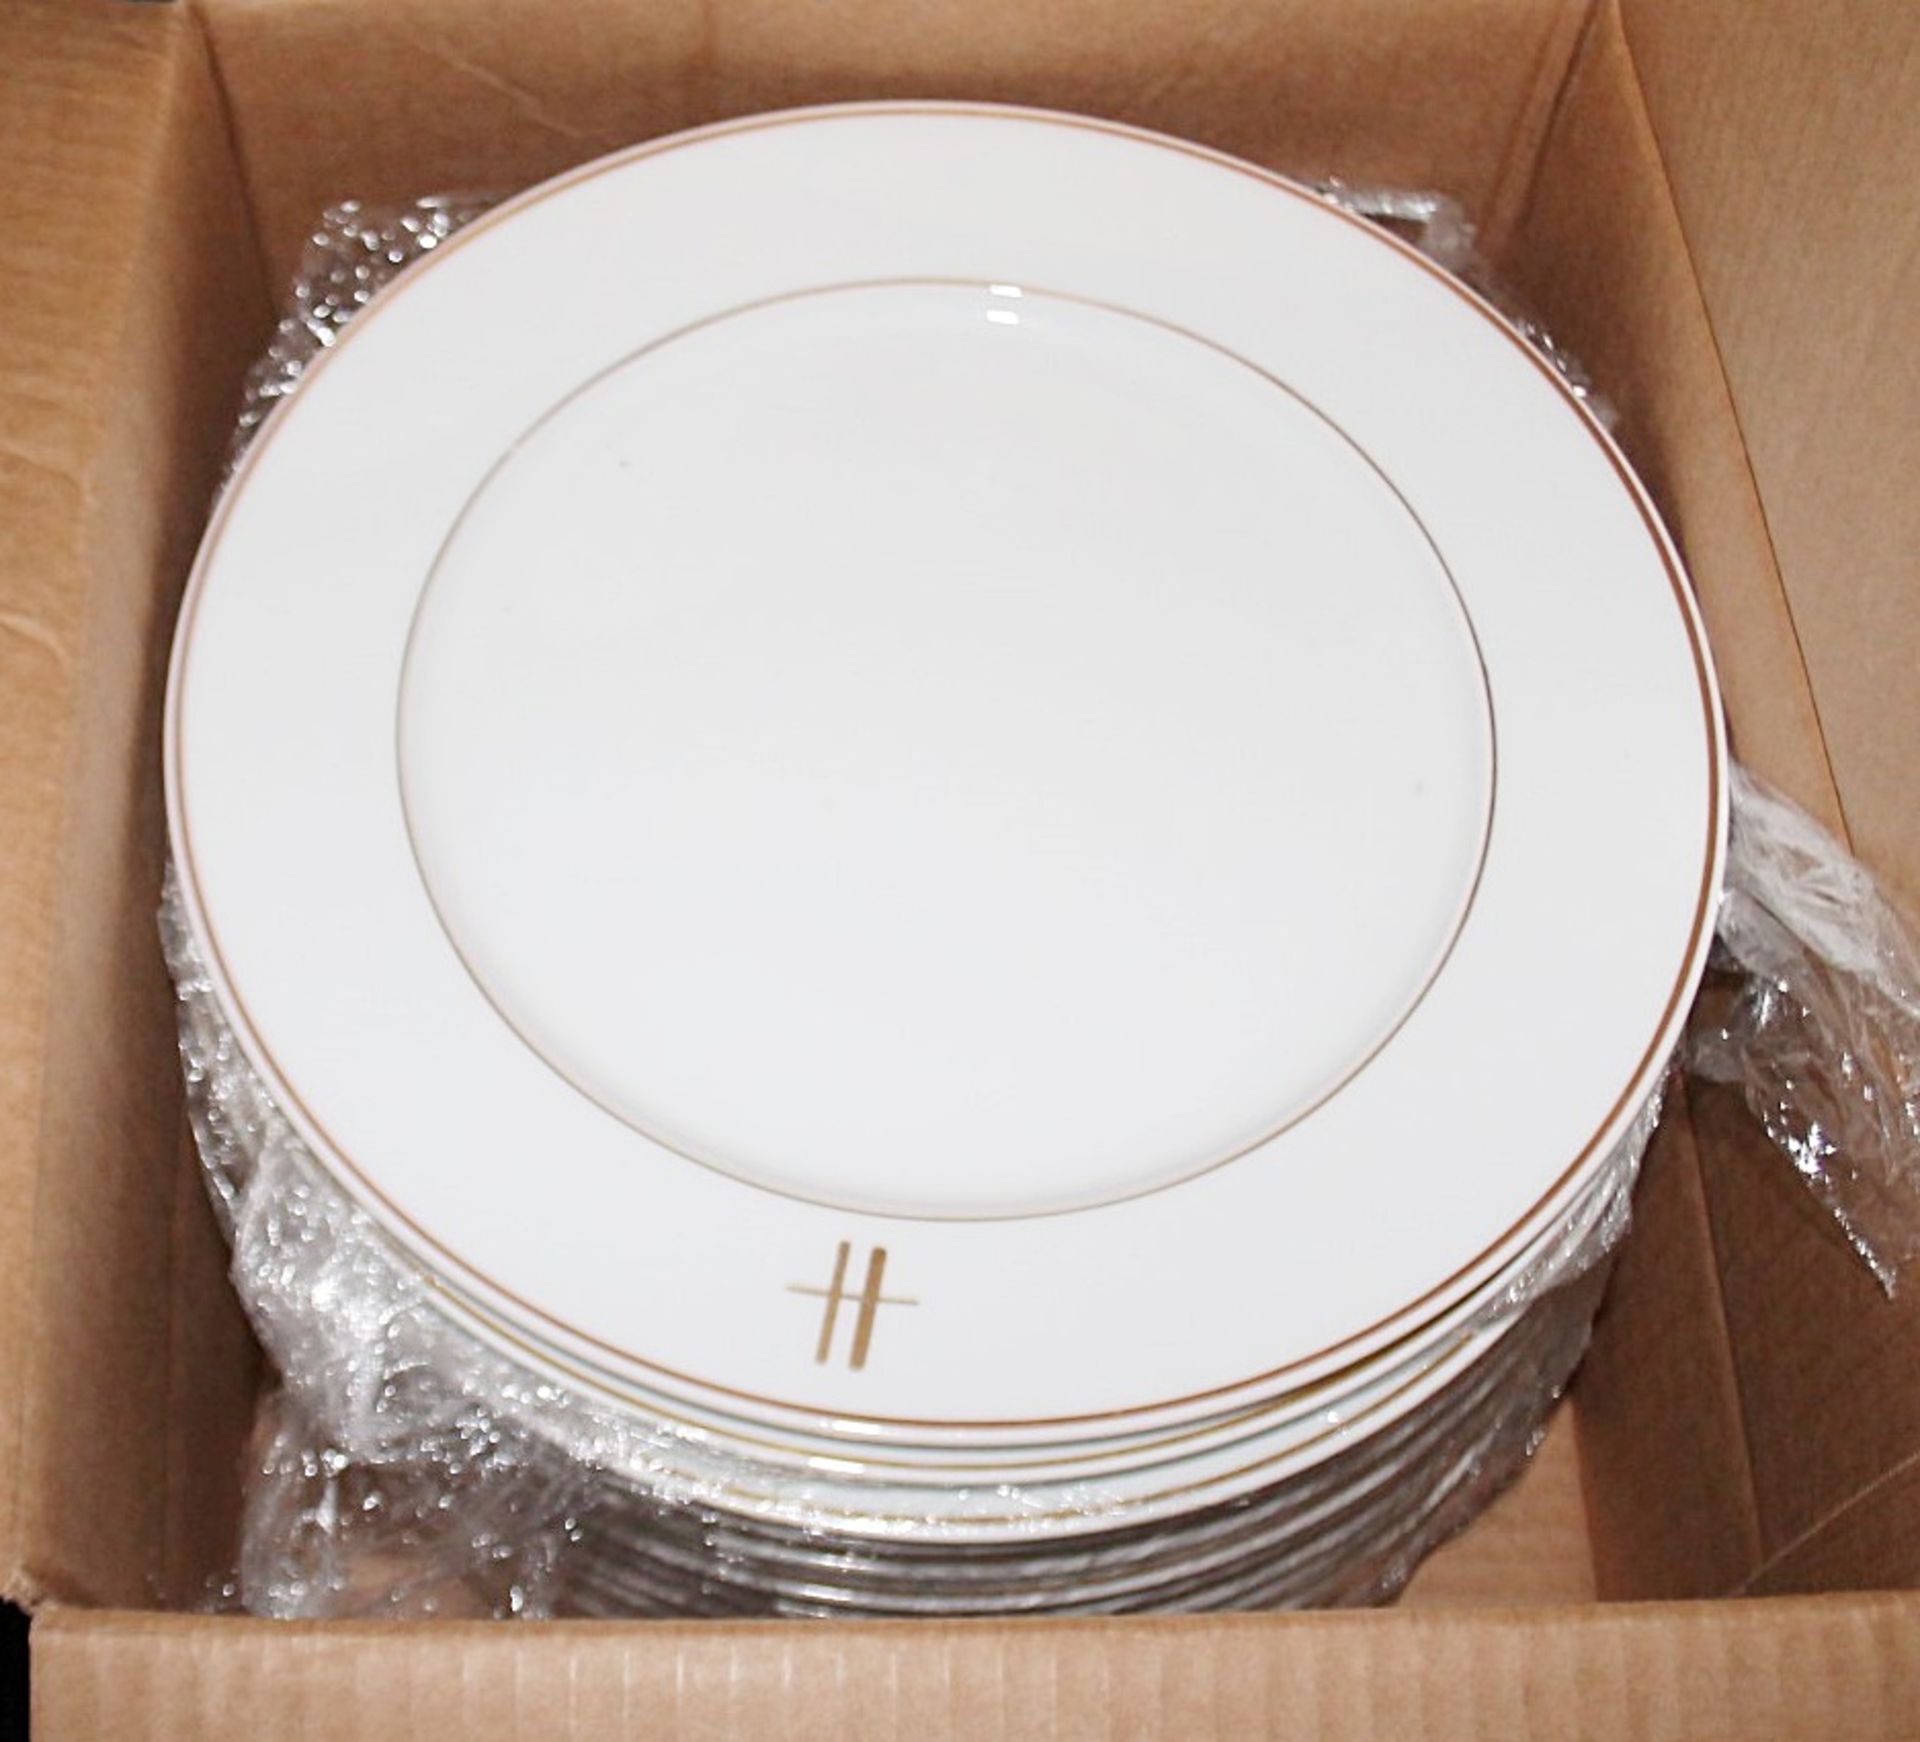 15 x PILLIVUYT Porcelain 30.4cm Large Dinner Charger Plates Featuring 'Famous Branding' In Gold - Image 2 of 5